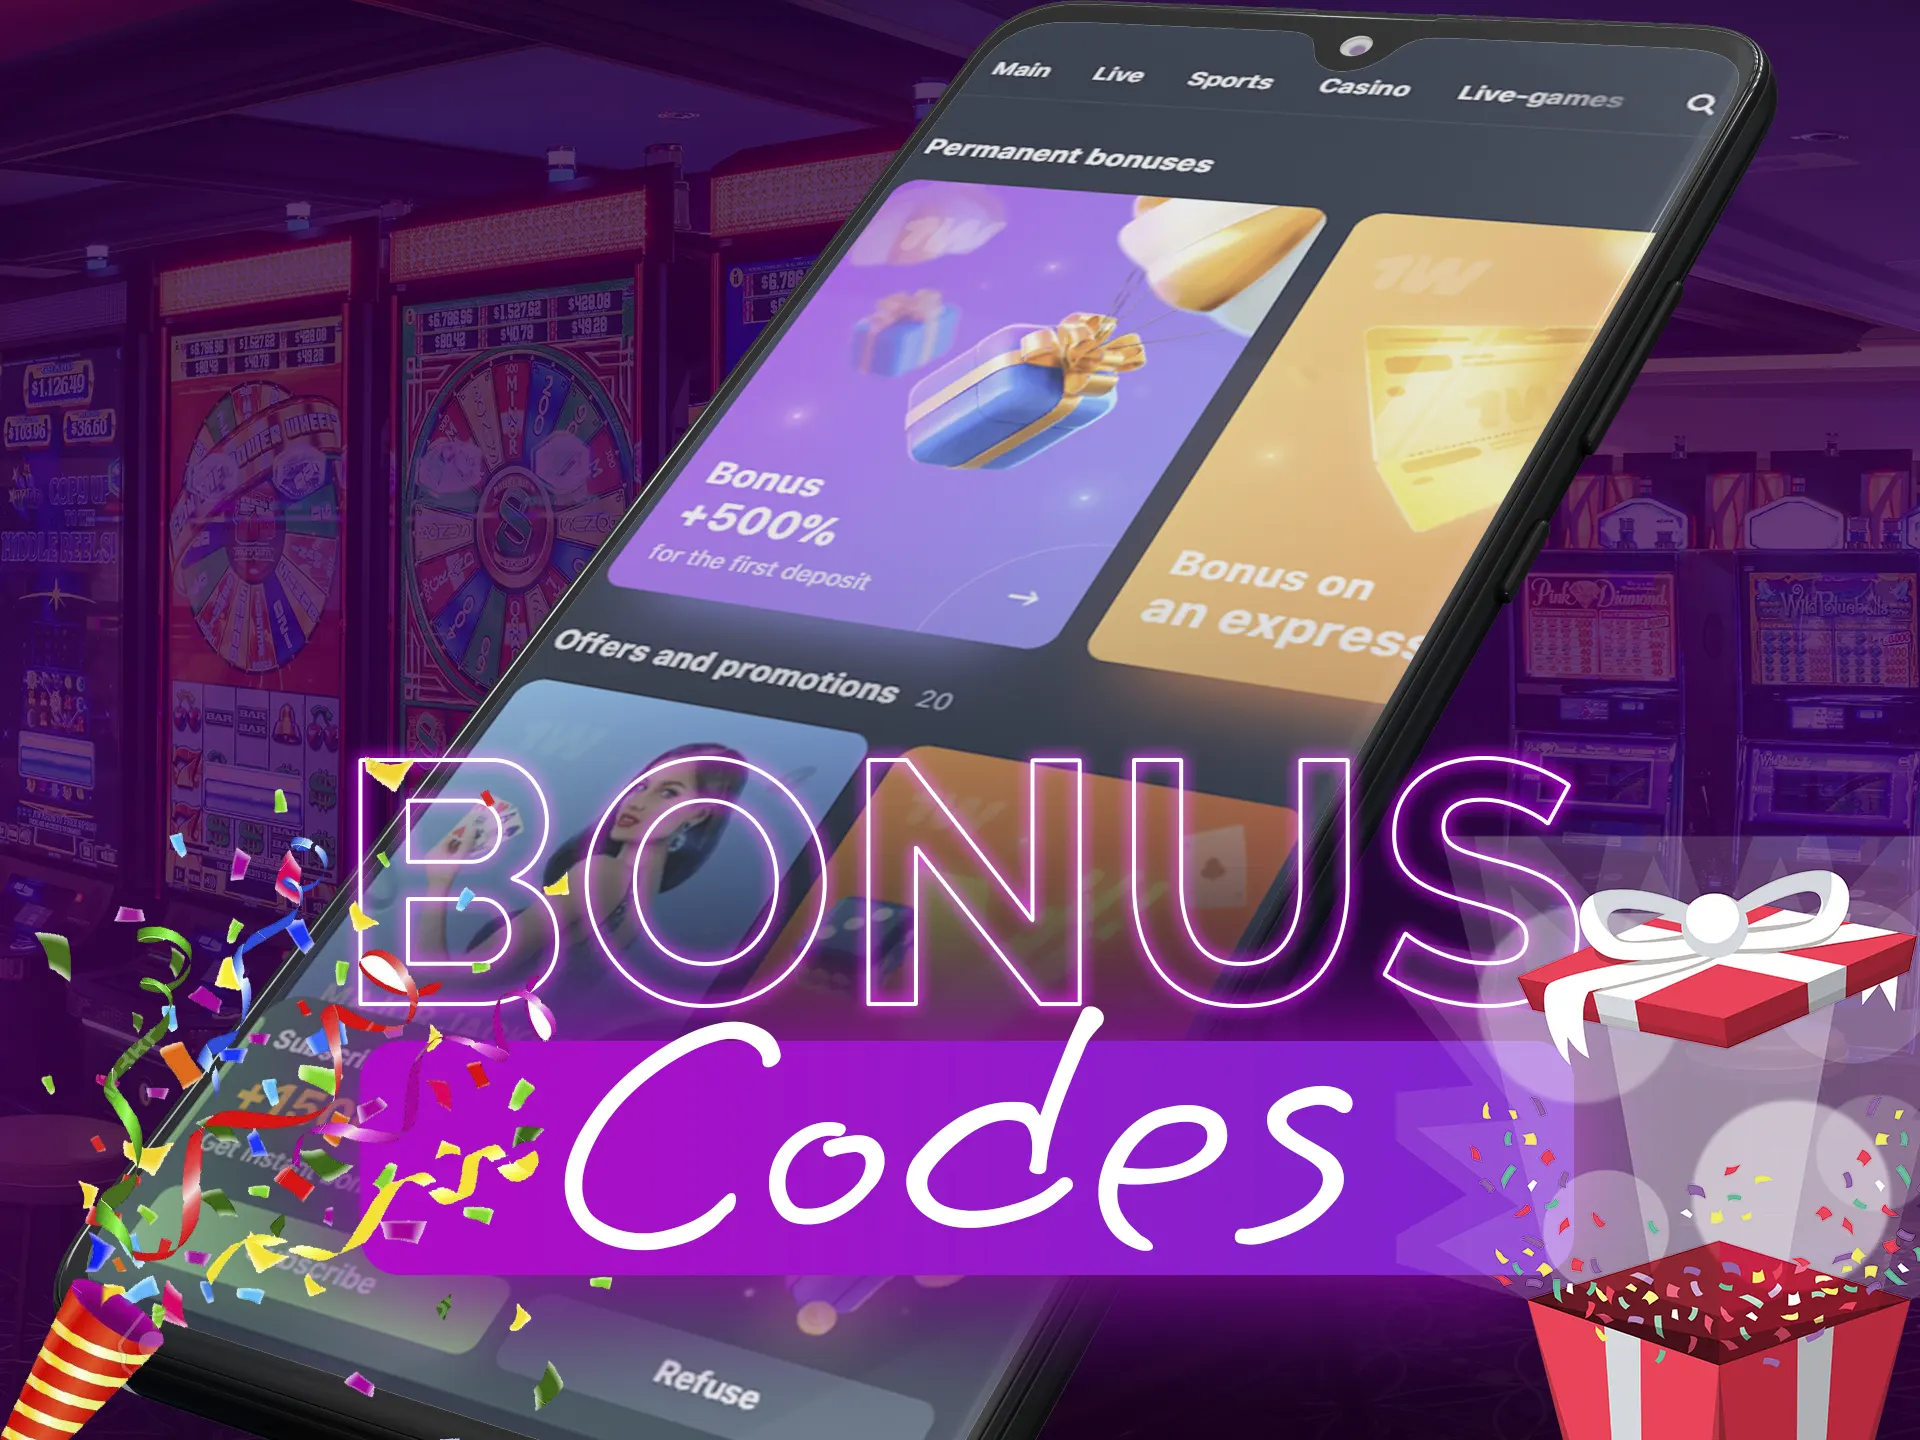 A bonus code is entered during registration, after which the game account is credited with money or free spins.